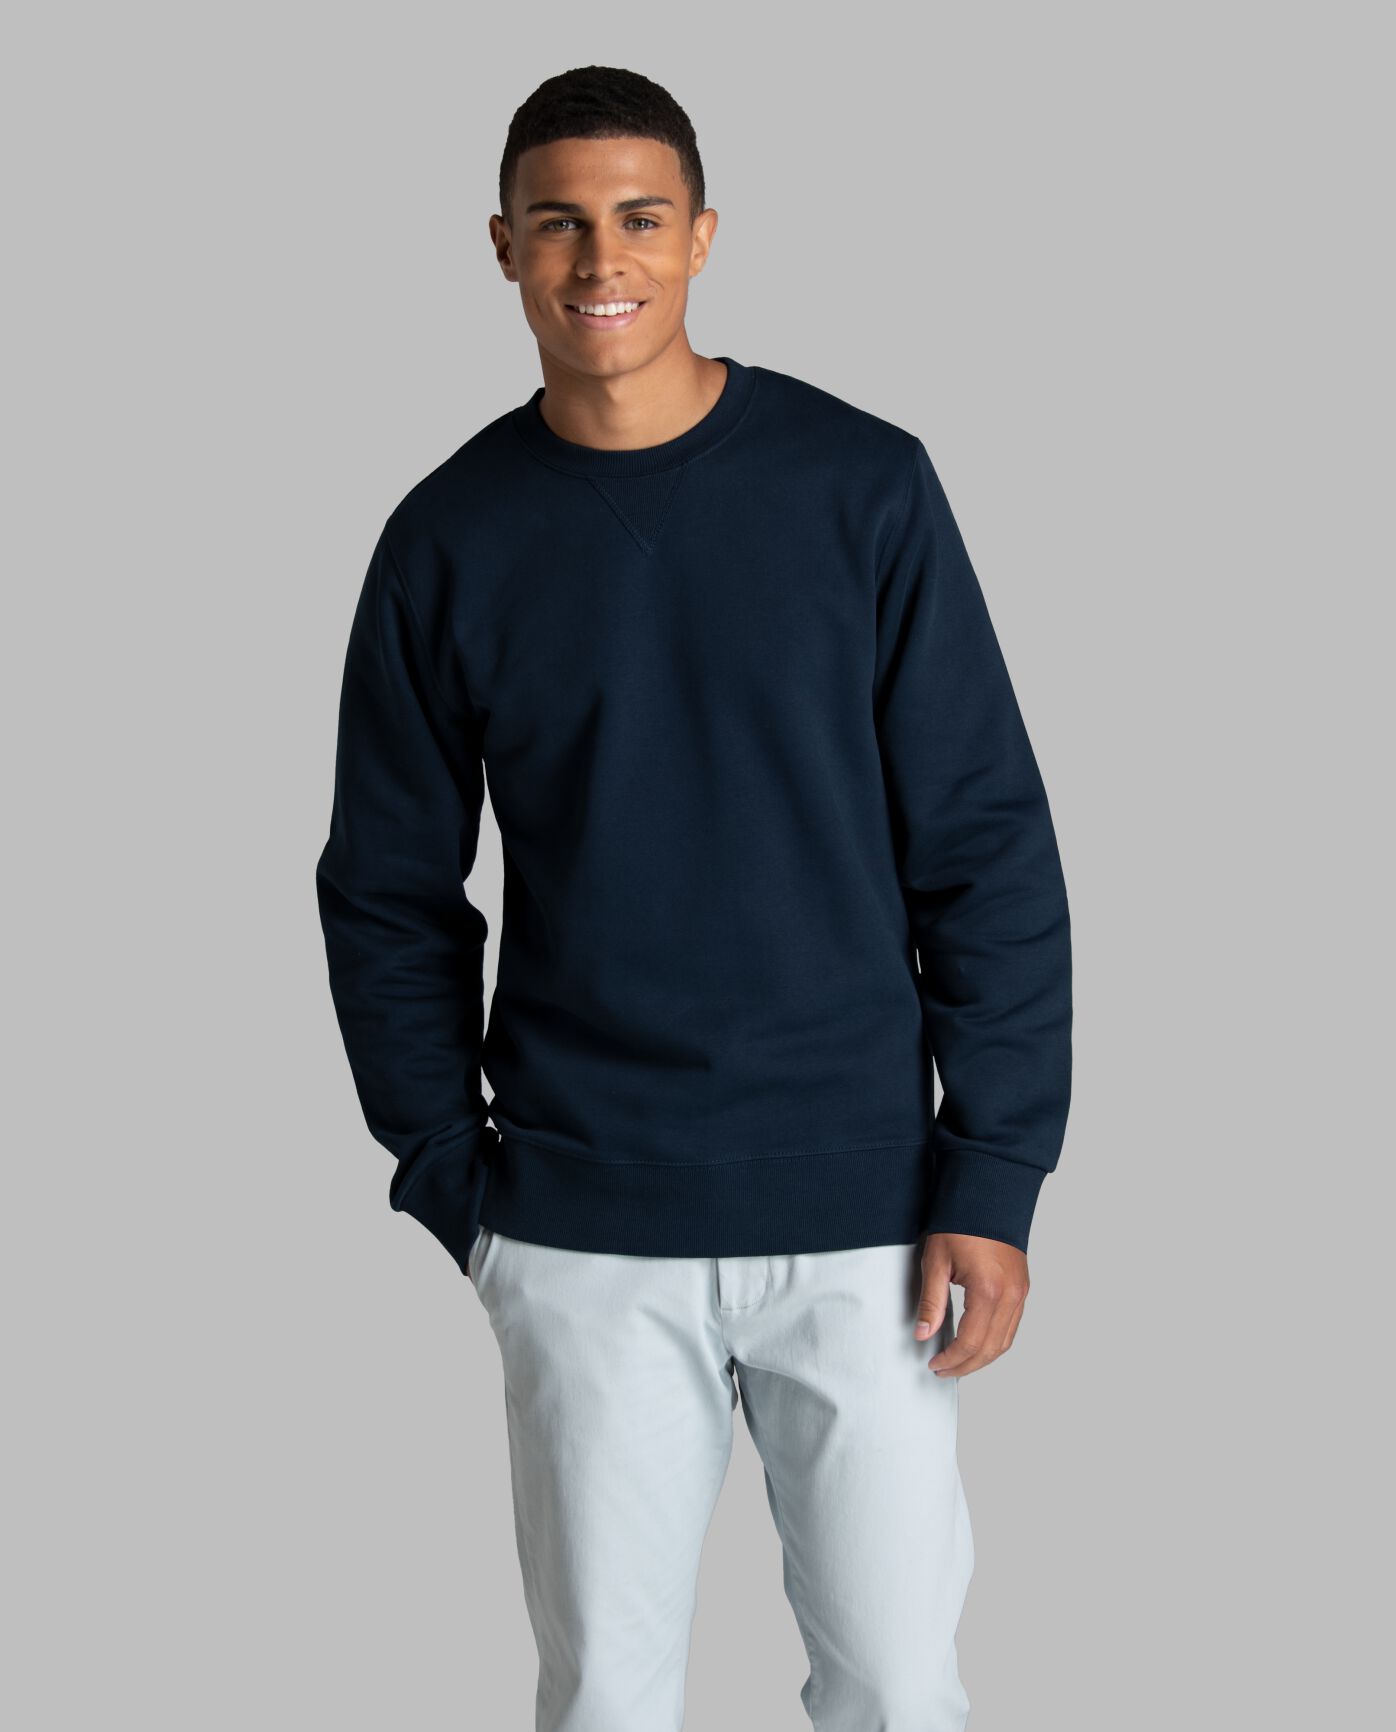 AMERICAN PLAIN LONG ARM HEAVY SWEATSHIRT-NAVY COLOR-UNORGETTABLE GIFT- TOP QUALITY-LOWEST PRICE GAURANTEED-DO NOT MISS THIS CHANCE-FREE HOME(POST OFFICE) DELIVERY-Art. No. DOC 62202-REA 30%